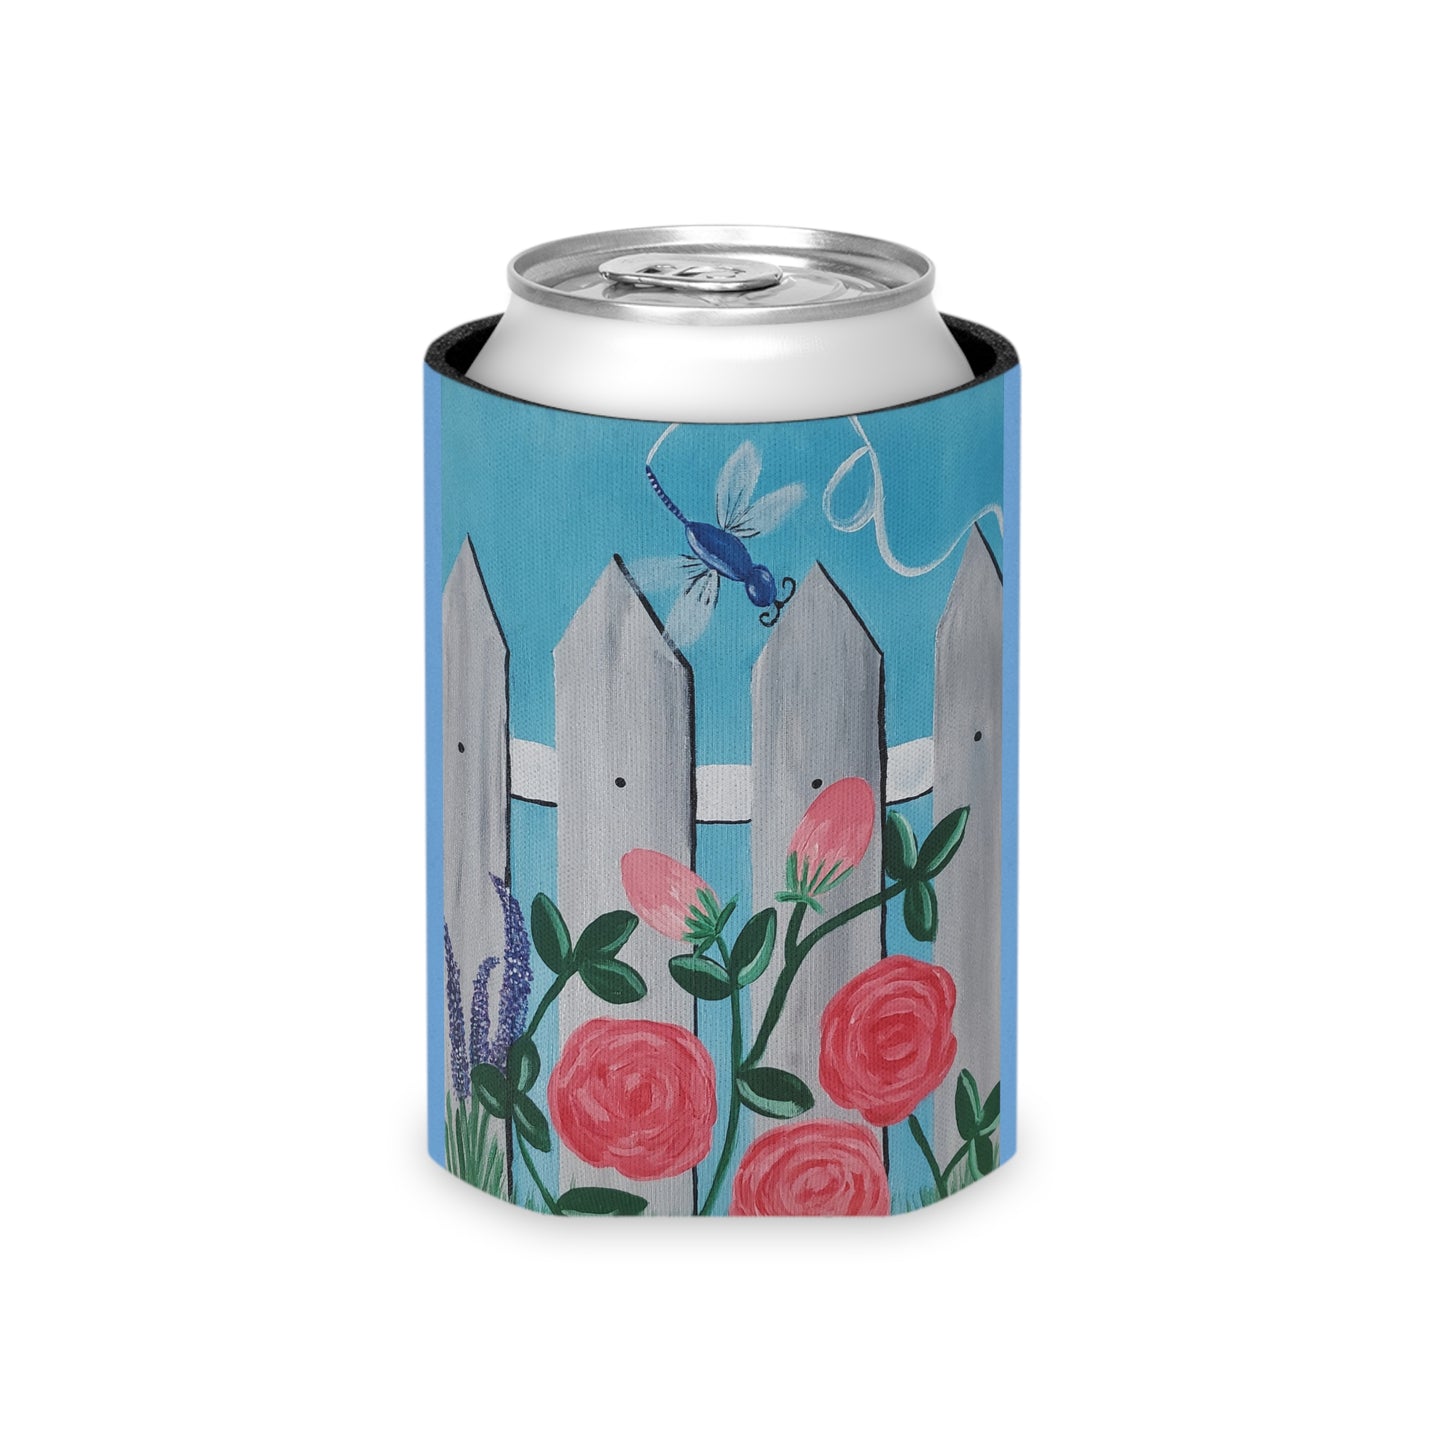 Spring is in the air Regular Can Cooler Sleeve (Brookson Collection) BLUE